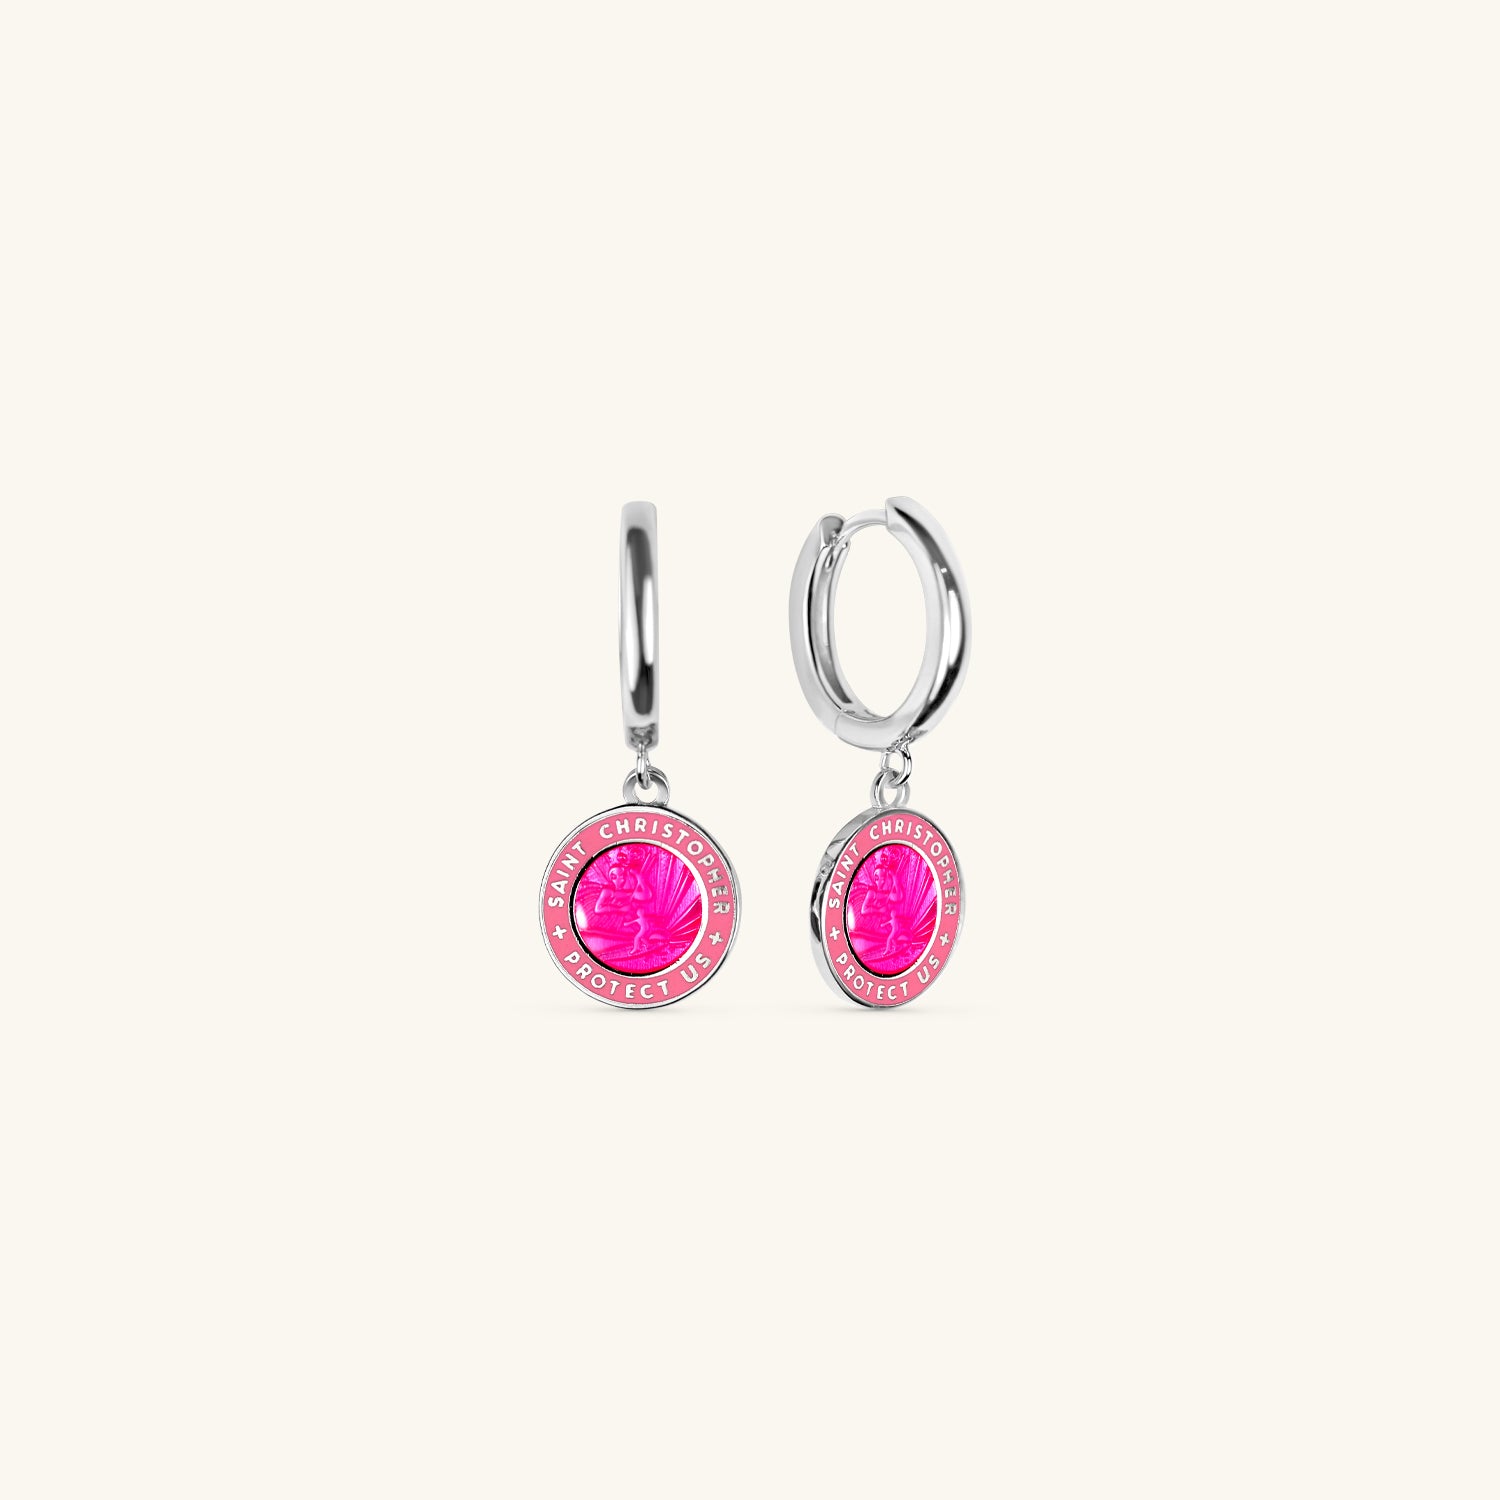 St. Christopher Earrings - Pink / Pink